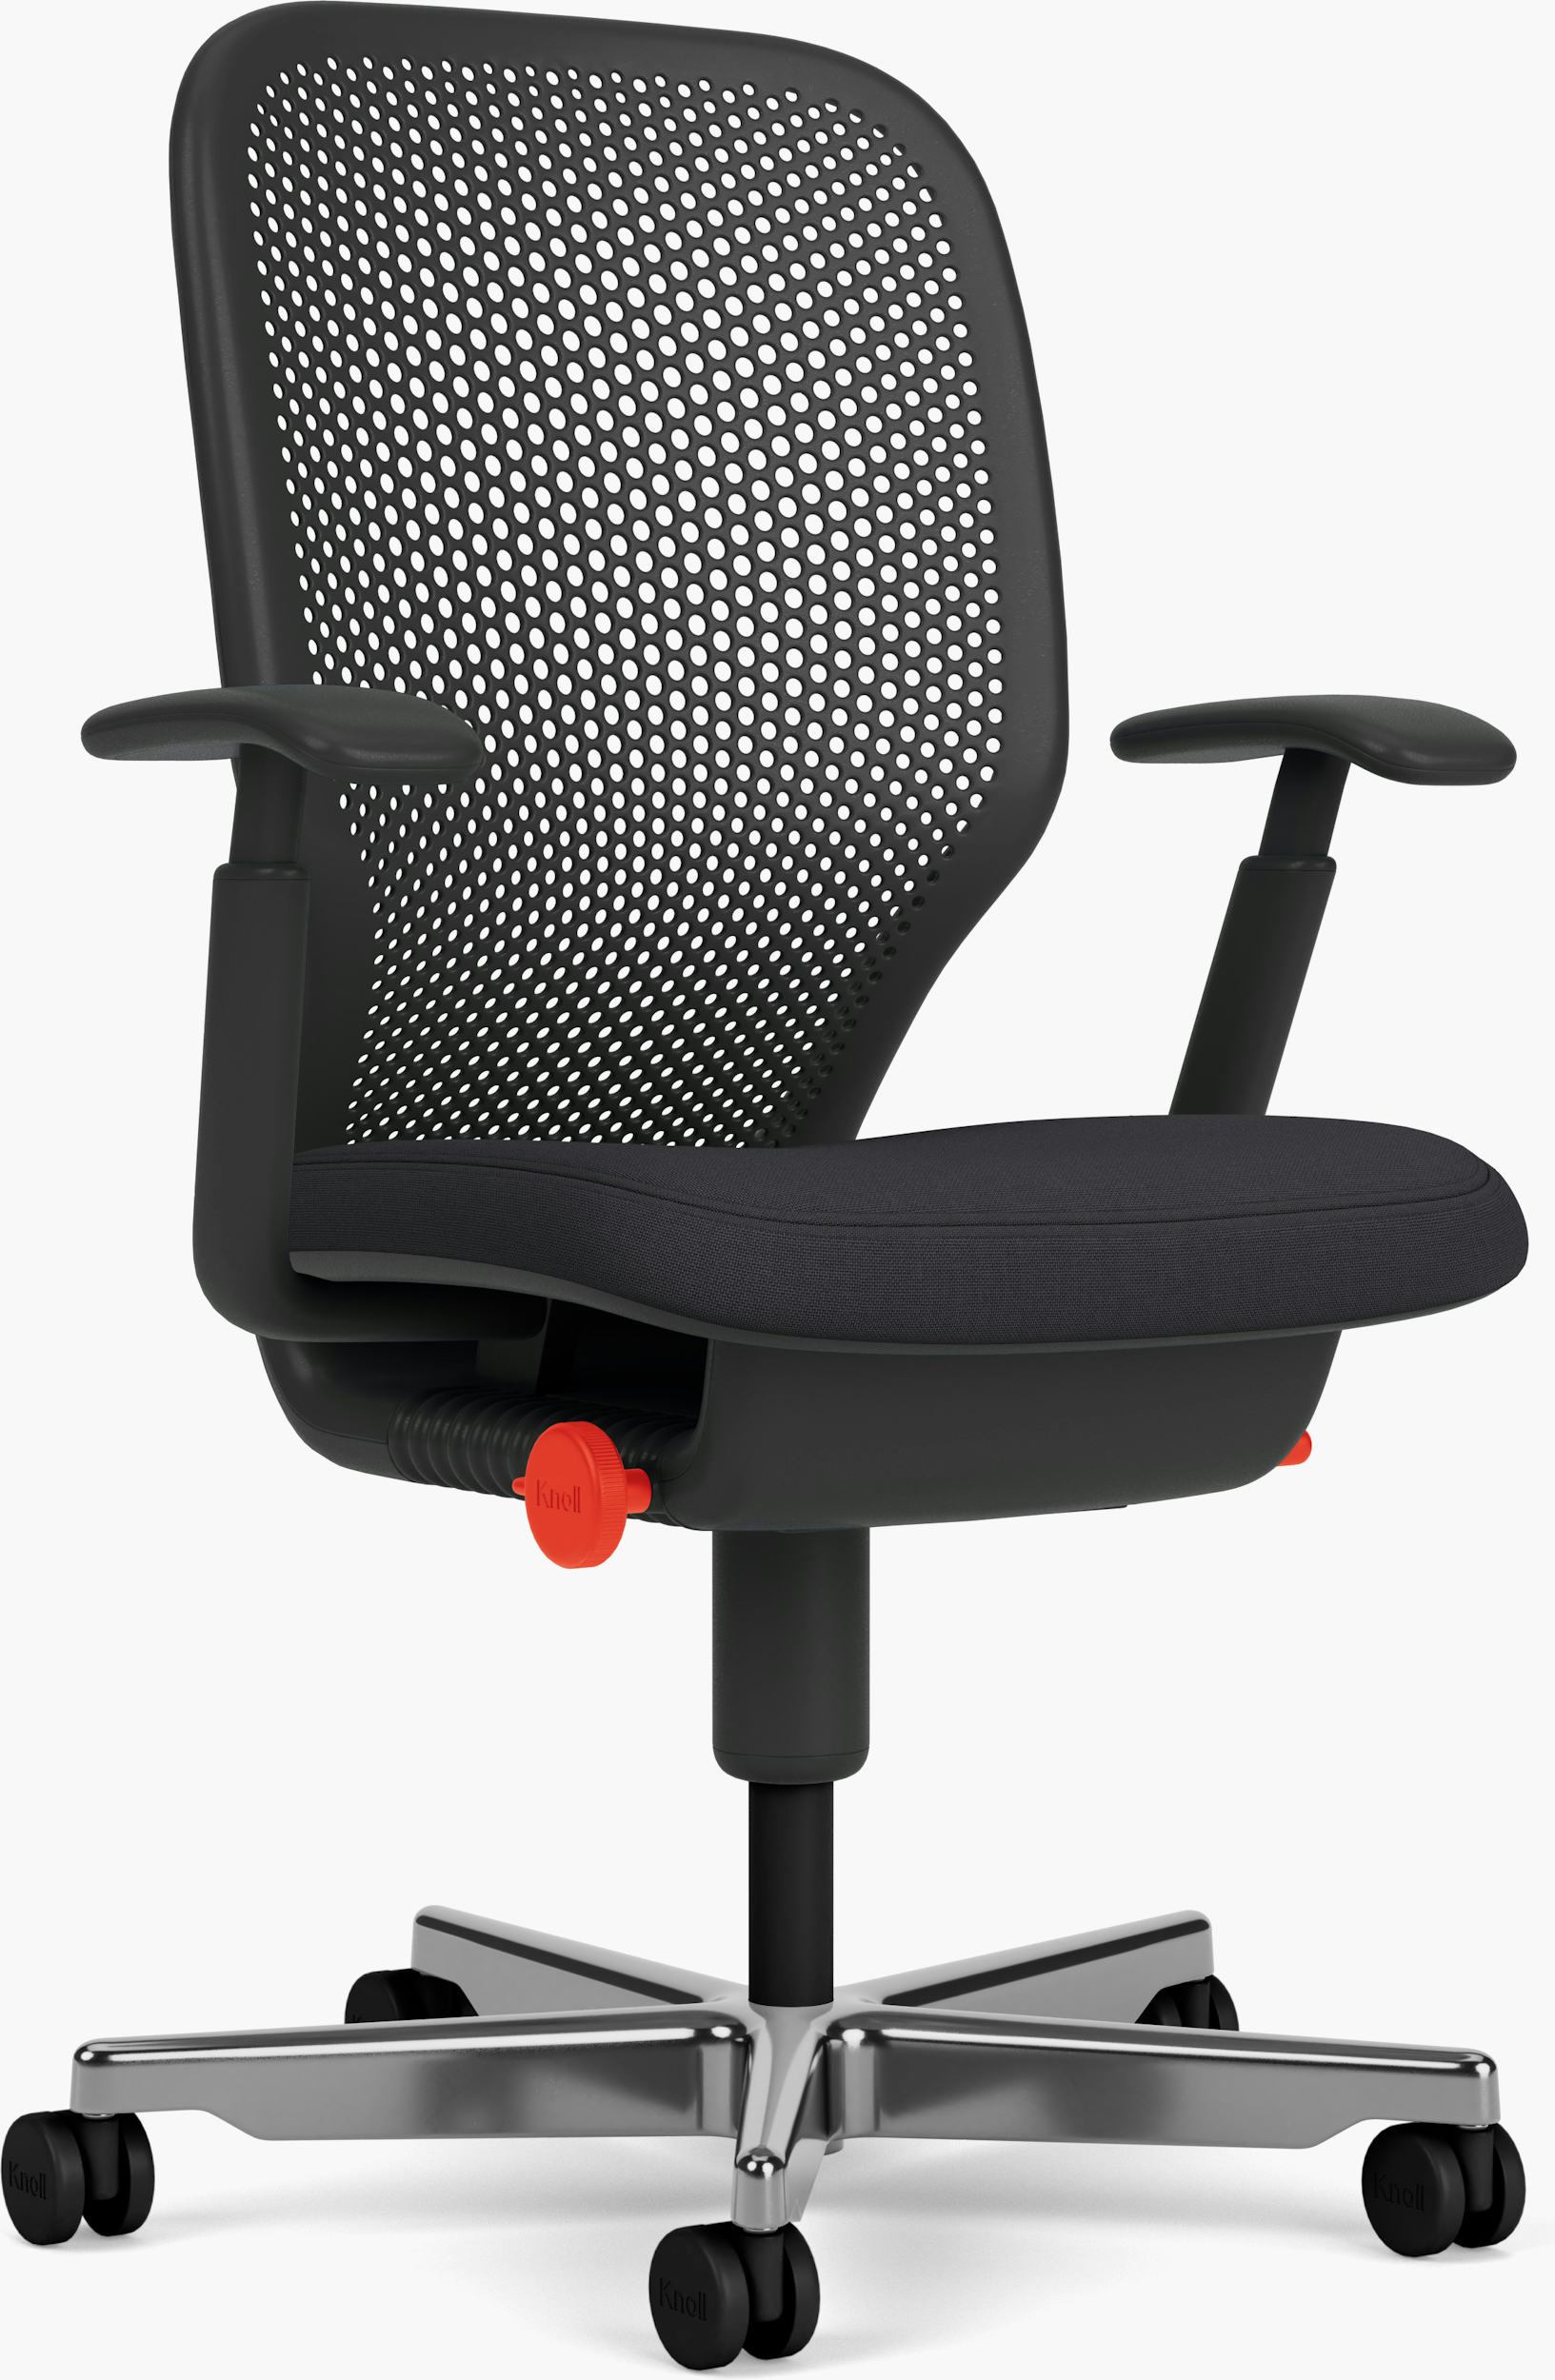 Marc Newson designed his Knoll task chair to last 'forever